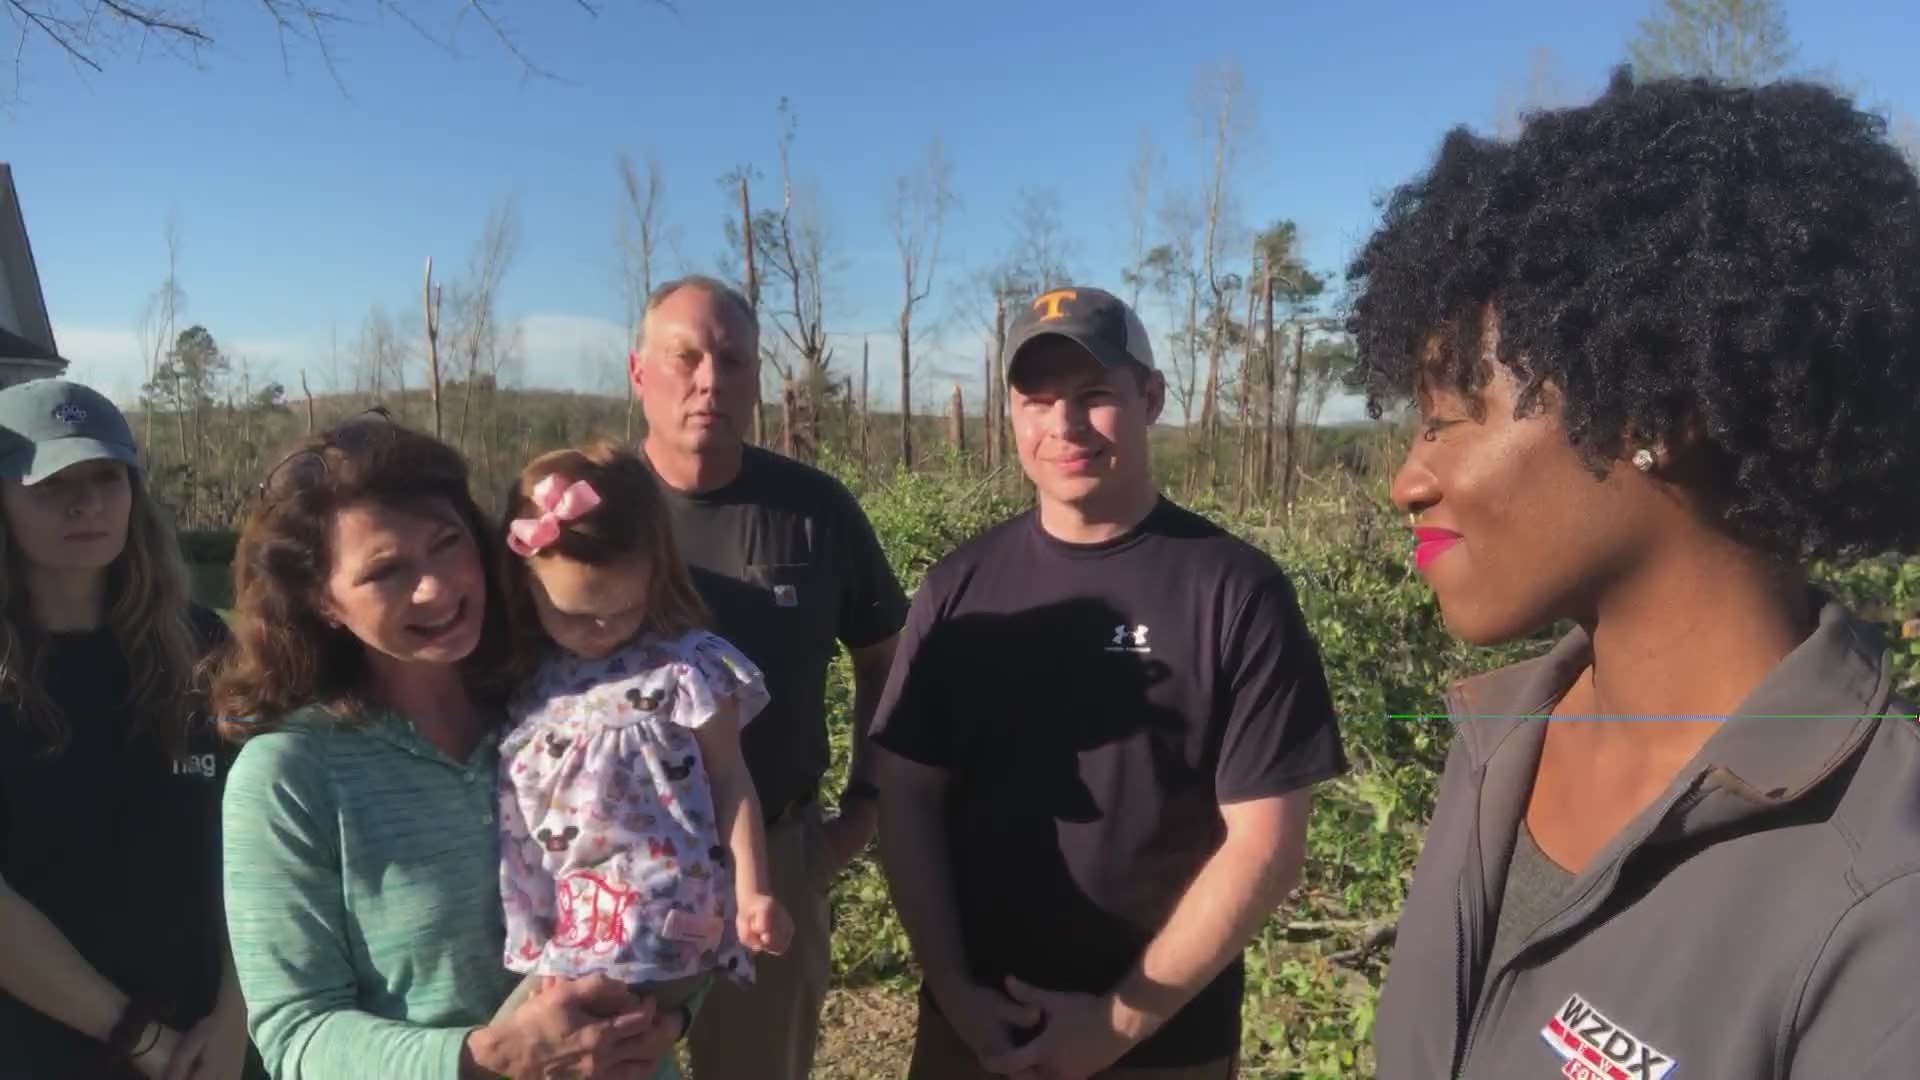 One family shared their story of surviving a tornado that left a path of destruction behind it.